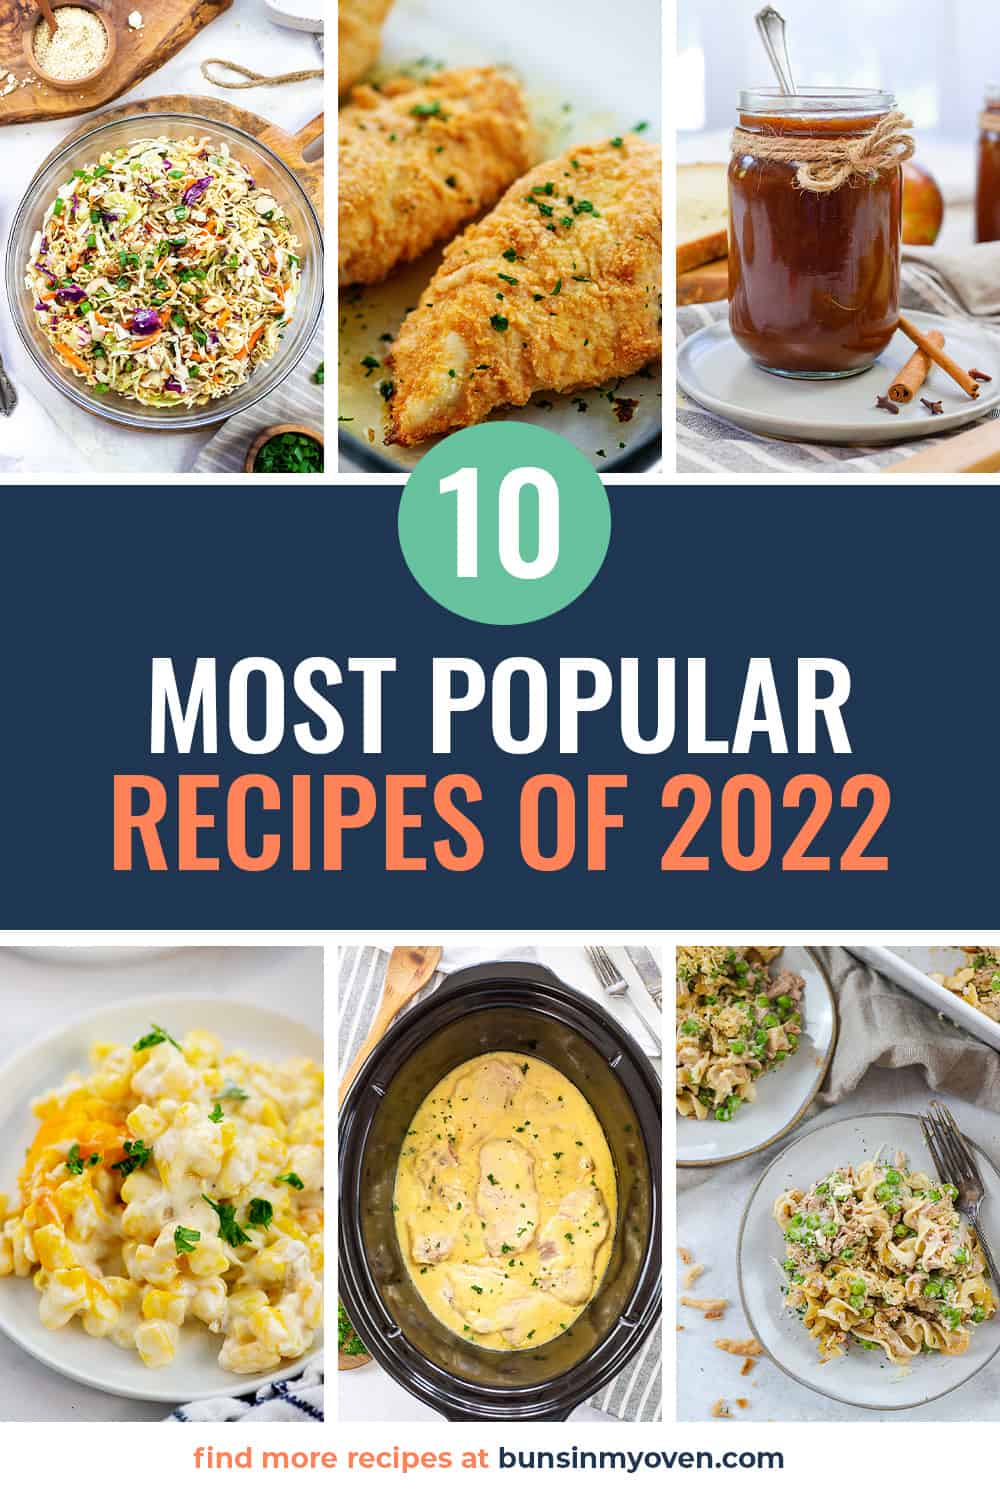 Collage featuring the 10 most popular recipes of 2022.